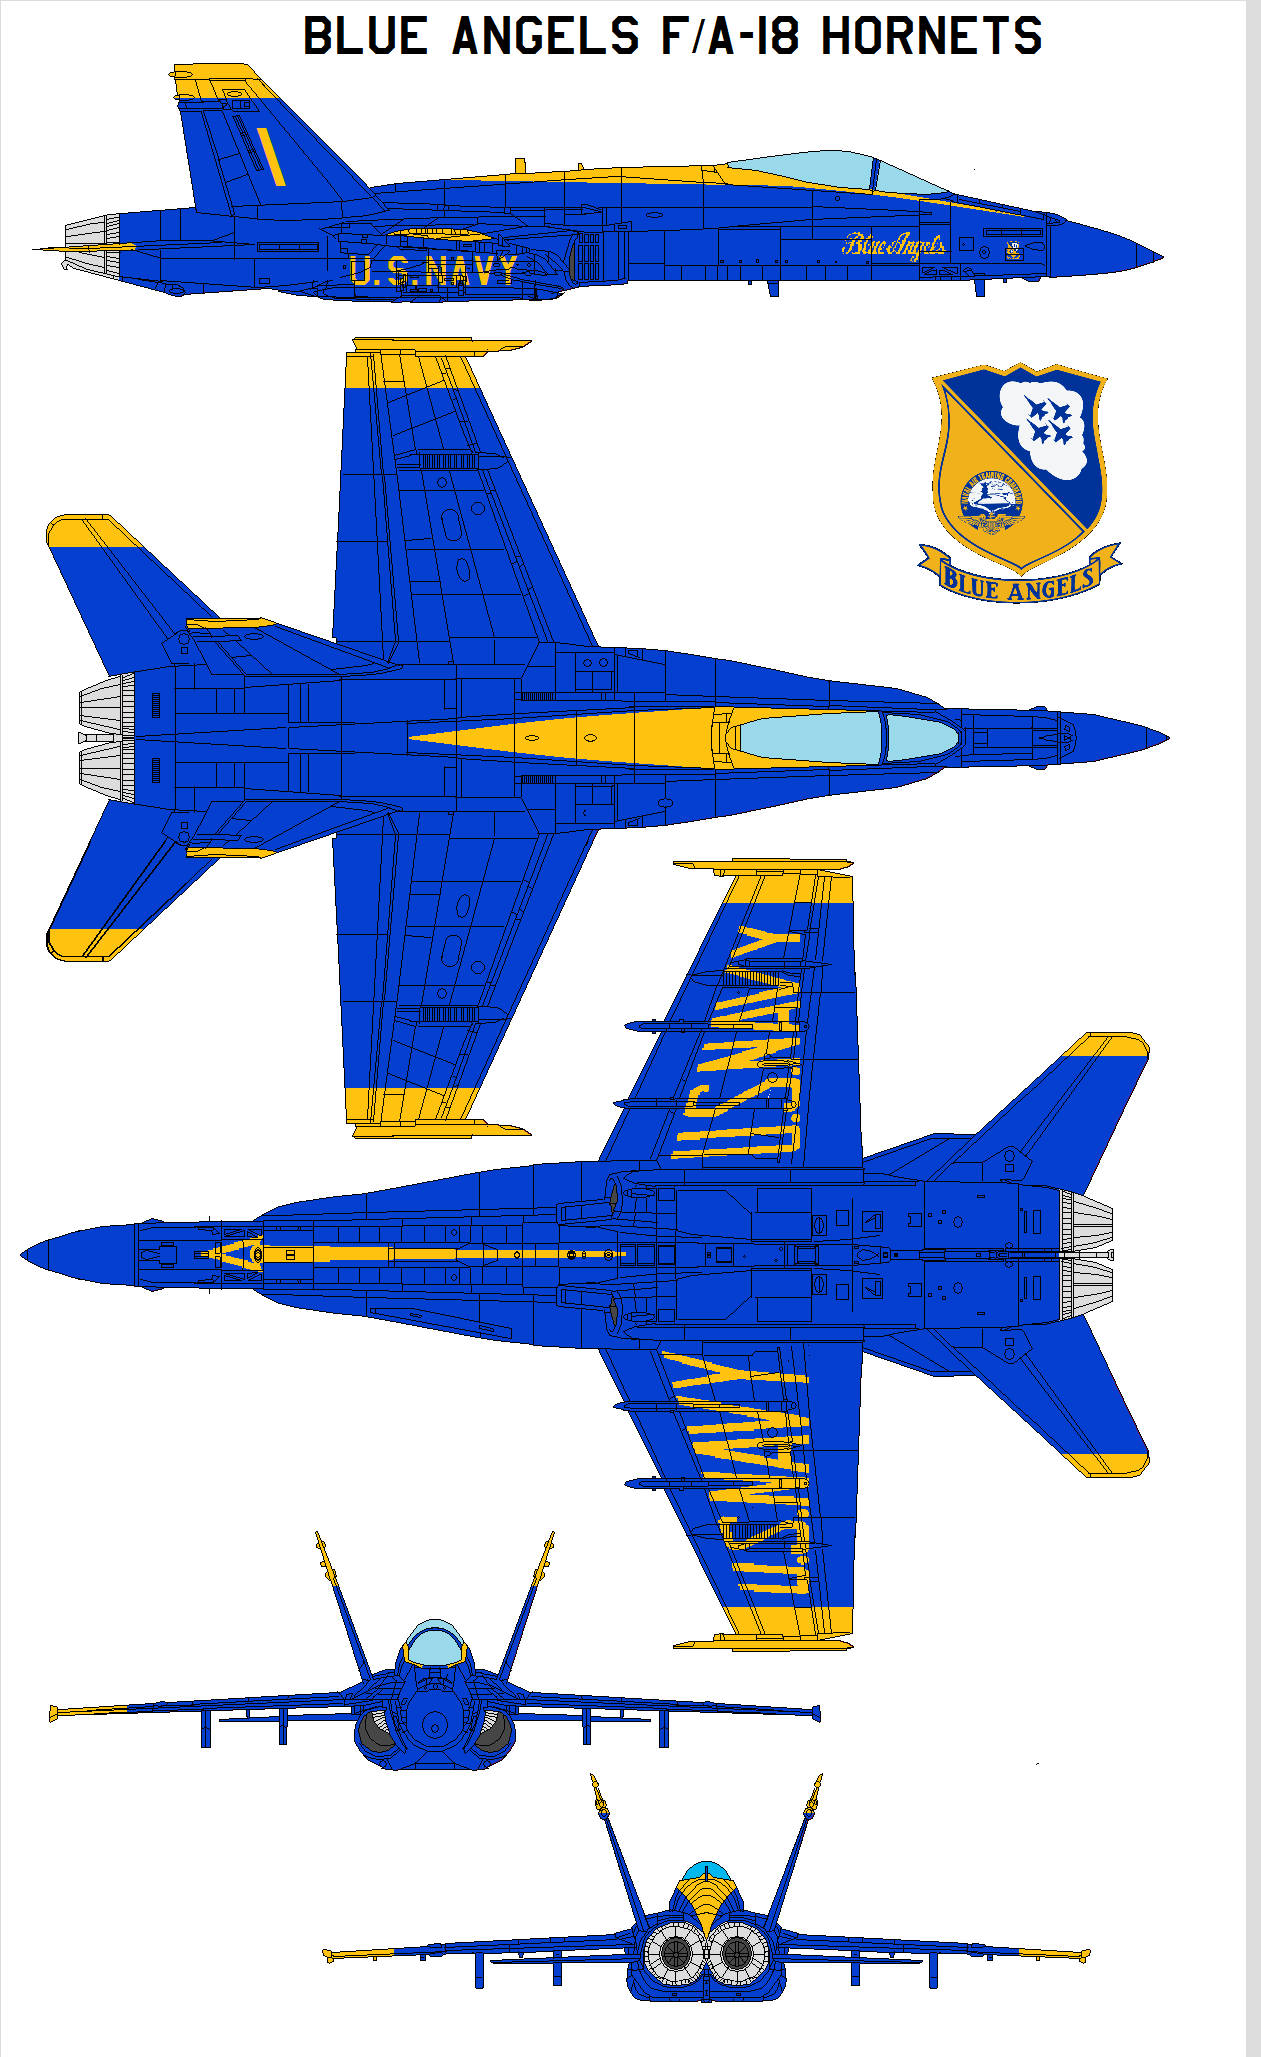 Blue Angels FA-18 Hornets by bagera3005 on DeviantArt